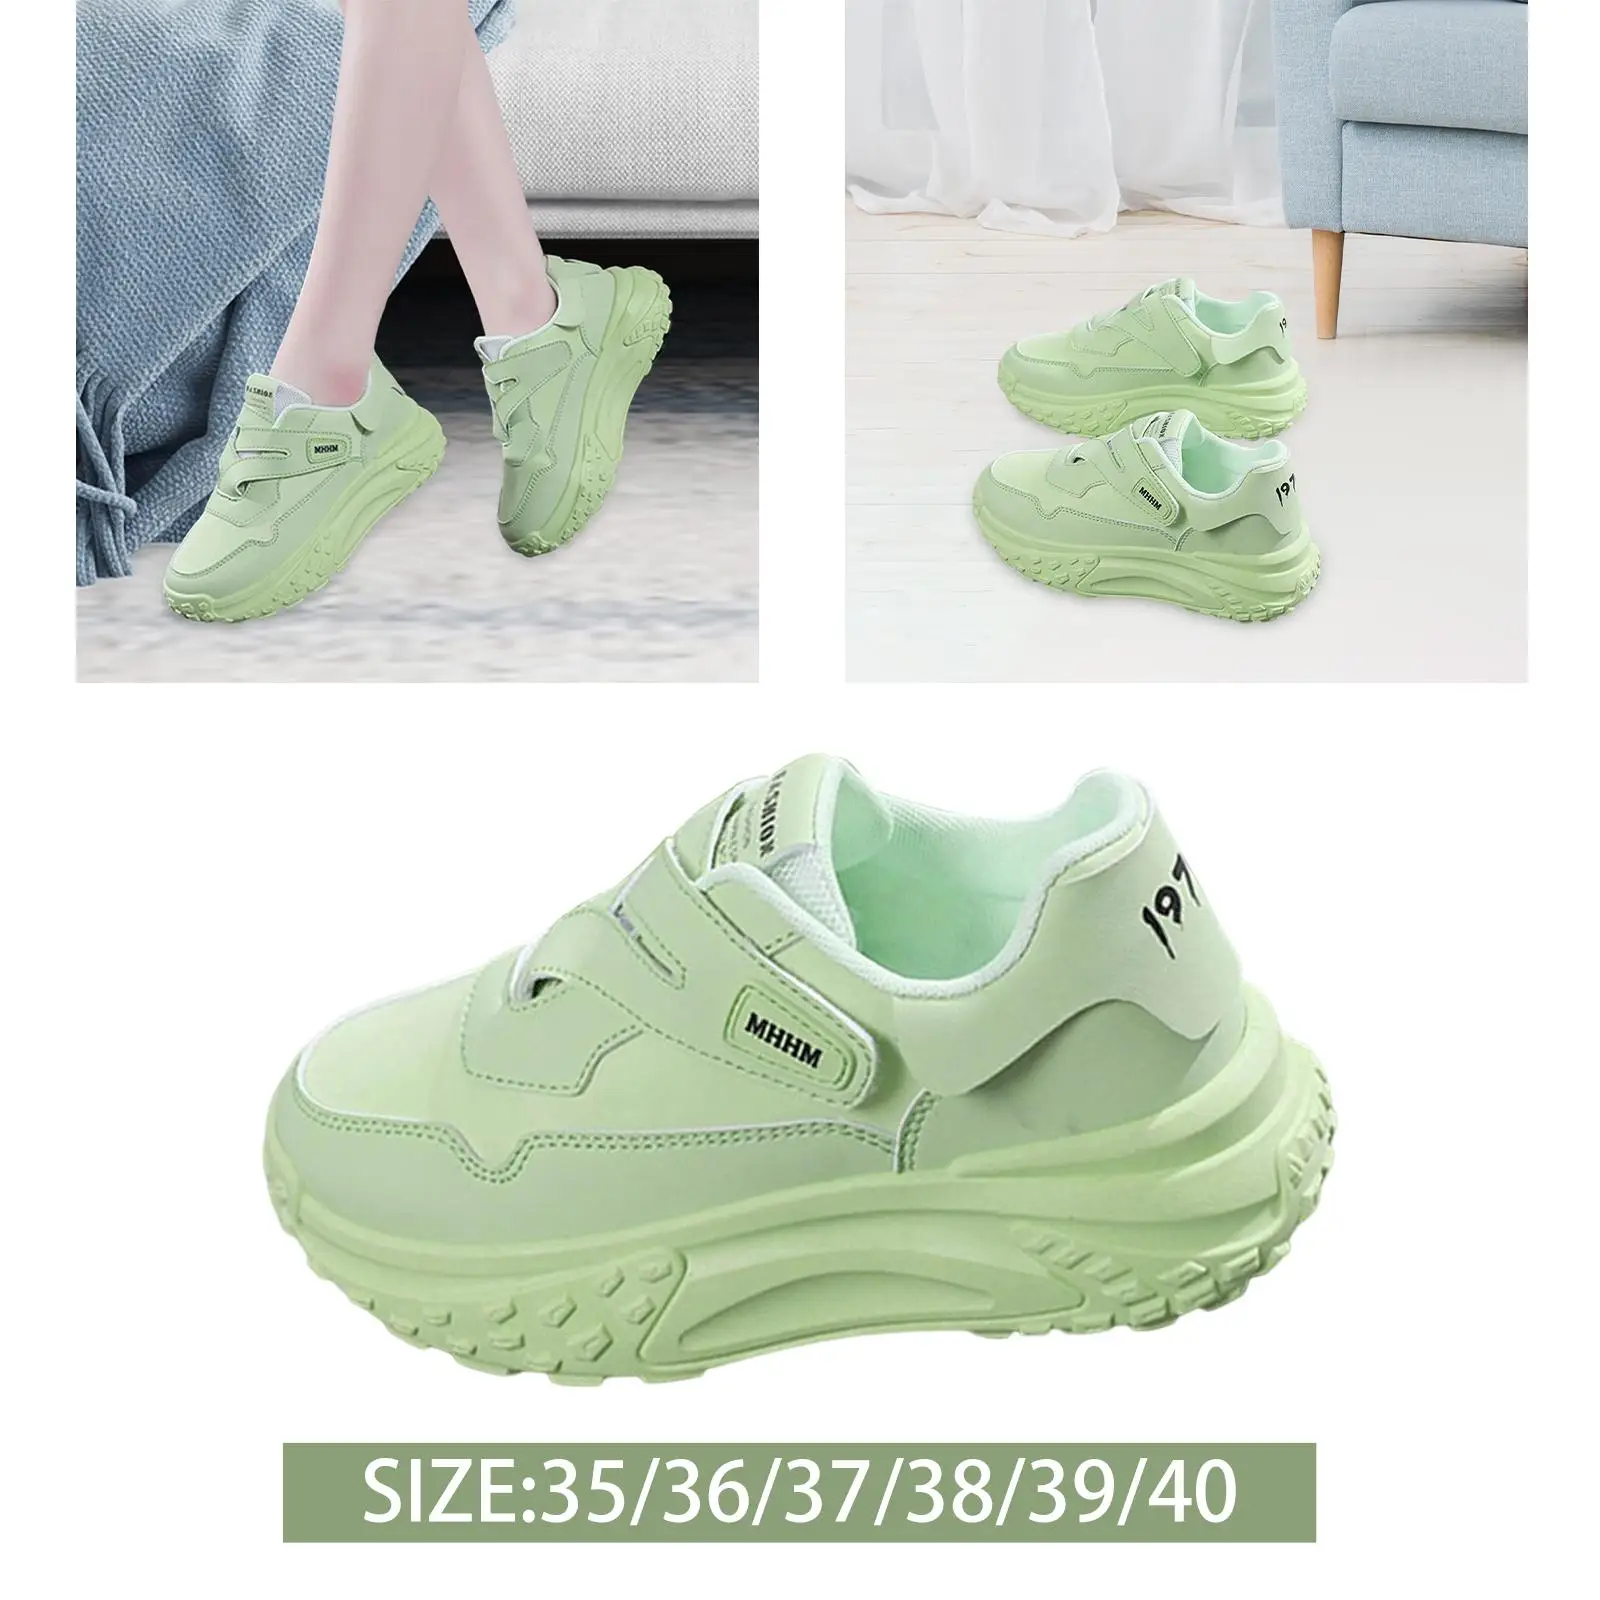 Women`s Shoes Sports Shoes Heightening Sole Casual Sneakers Leisure Sneakers for Outdoor Indoor Workout Fishing Travel Holidays